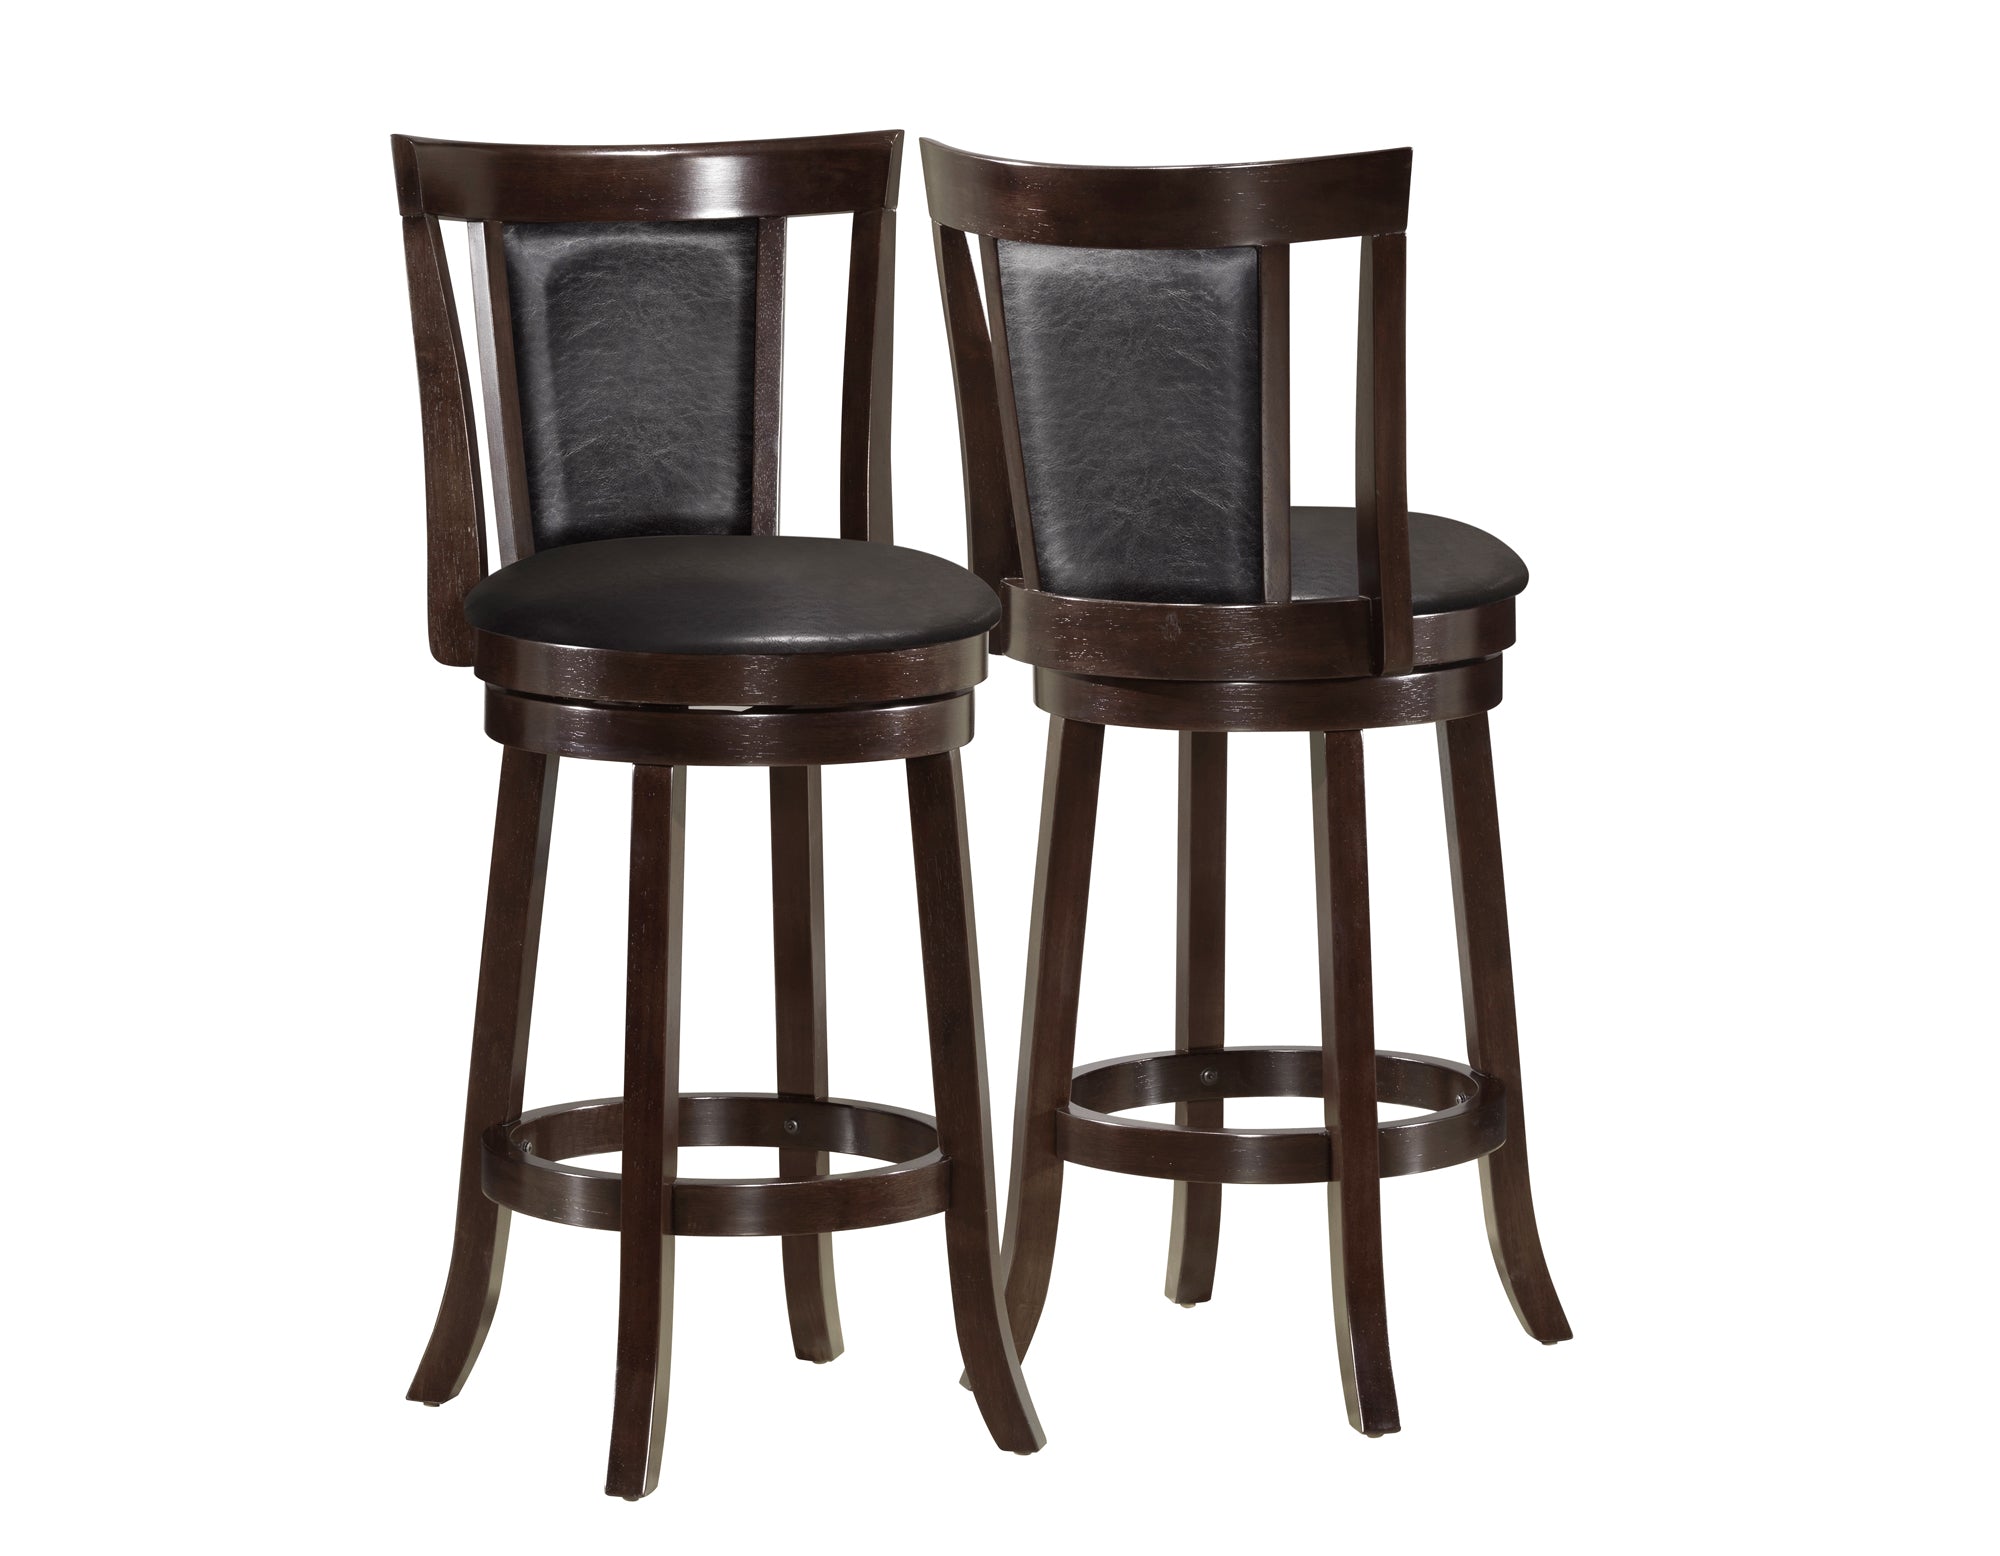 Set of Two " Black And Dark Brown Solid Wood Bar Chairs